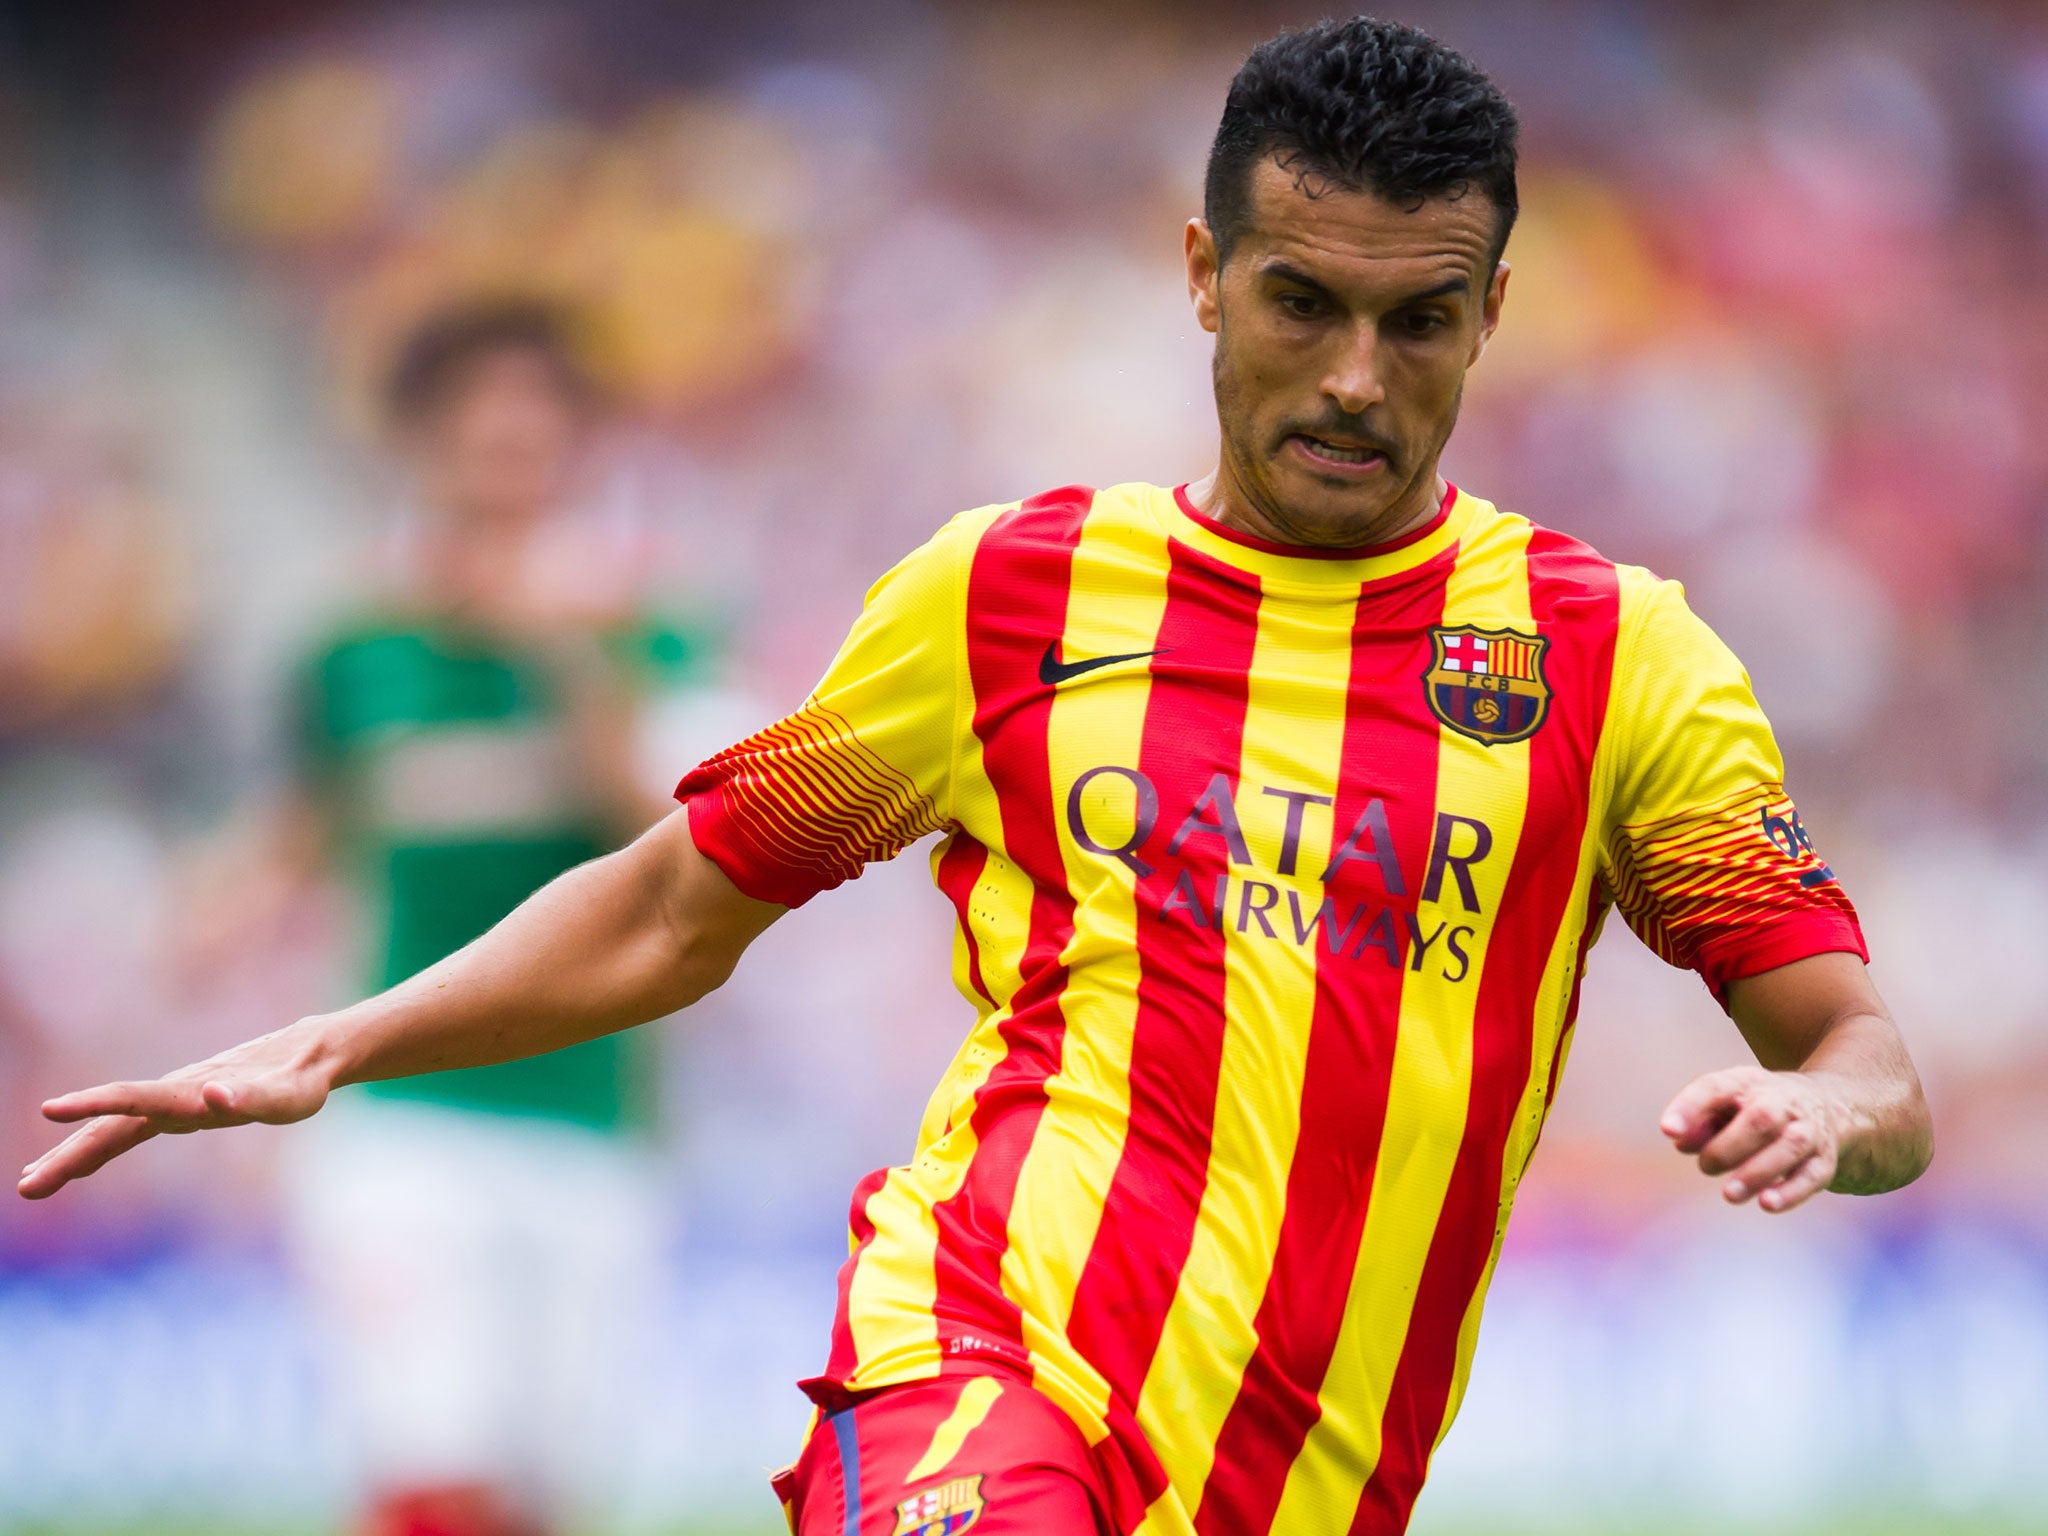 Pedro in action for Barcelona in their 2-0 win over Athletic Bilbao at the weekend